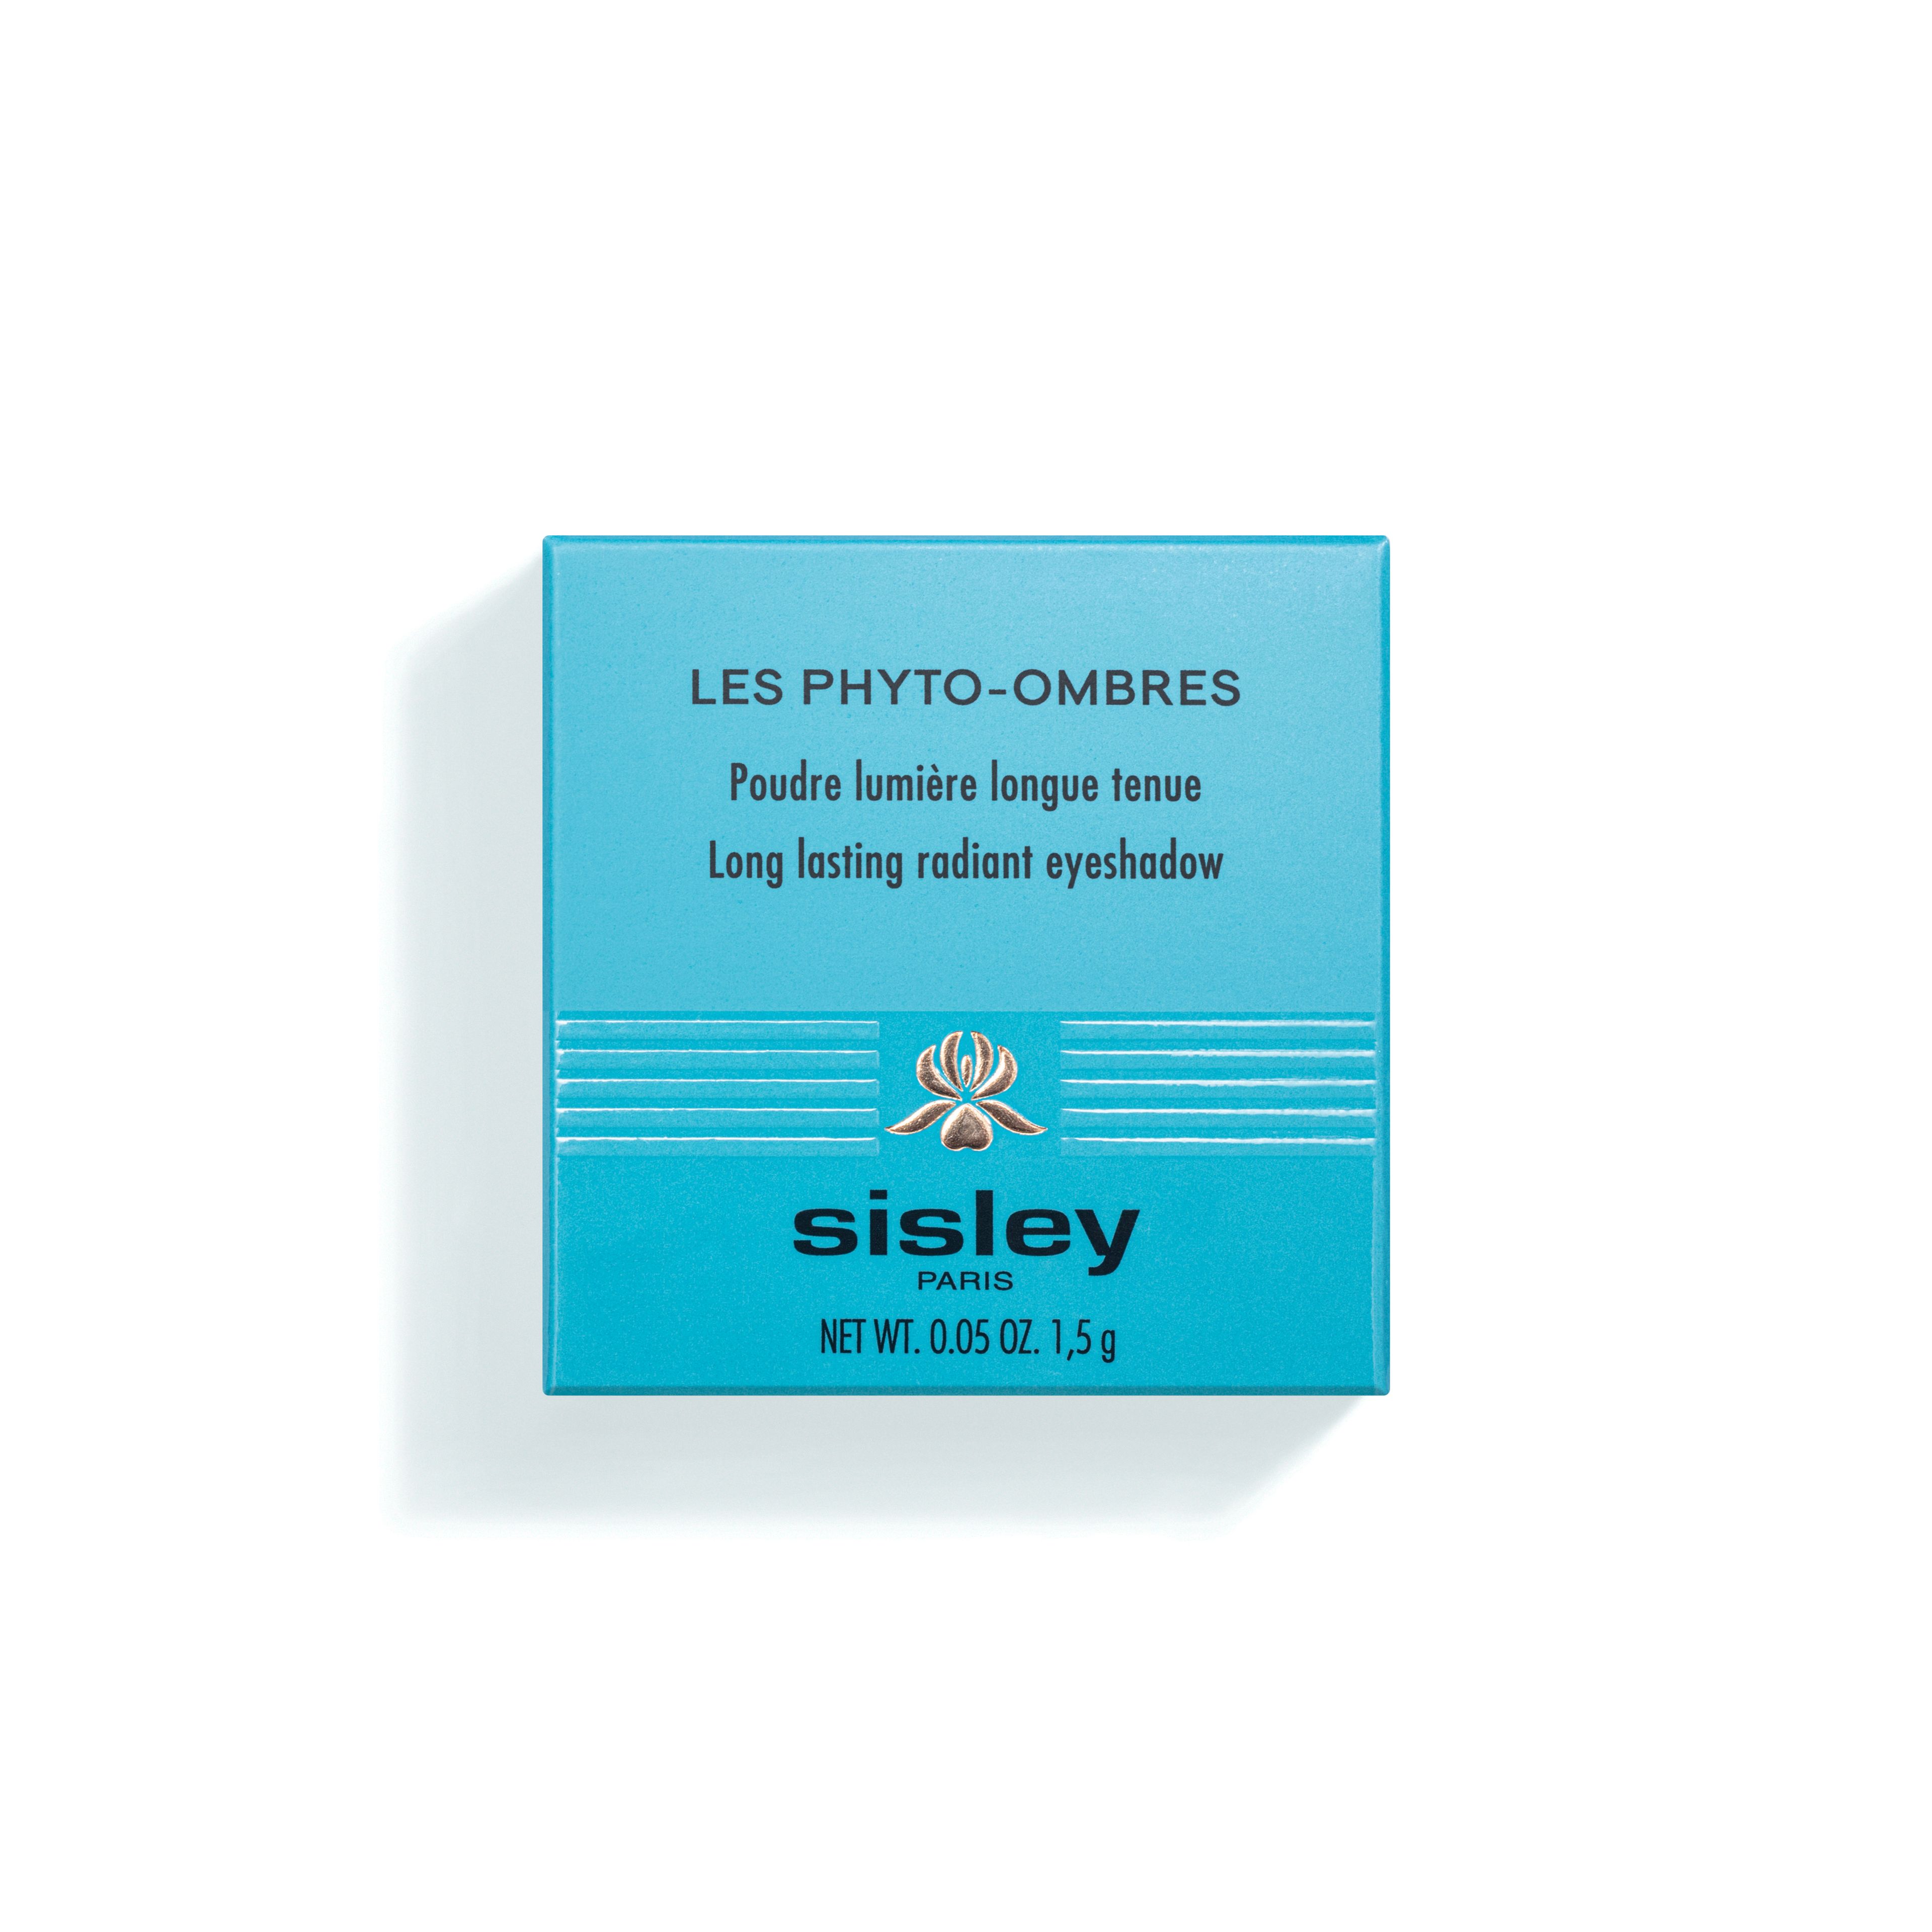 SISLEY Les Phyto-ombres 4